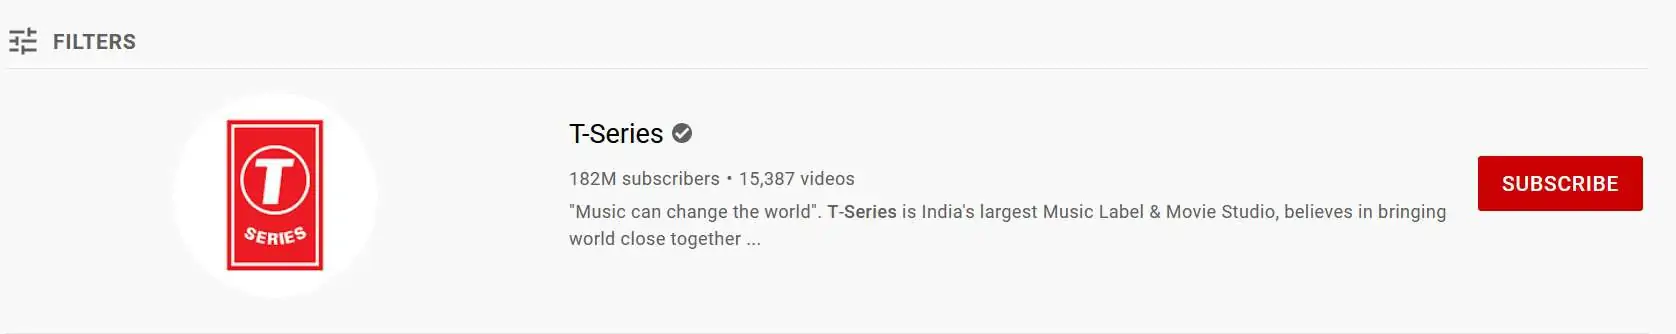 T-Series subscriber